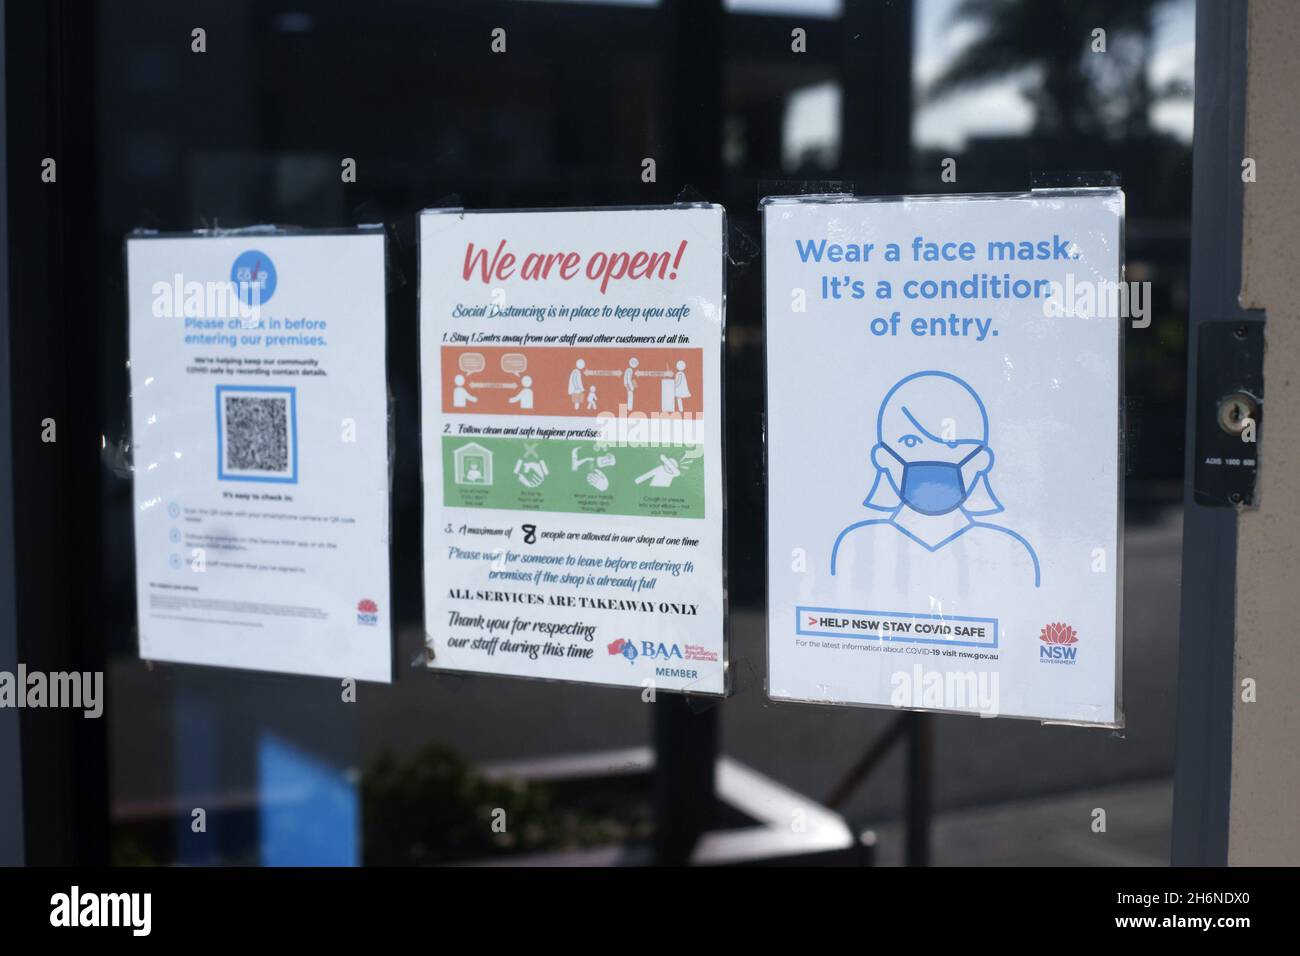 Australian Covid-19 signage with QR code and sign requesting that face masks be worn inside the commercial premises. Stock Photo